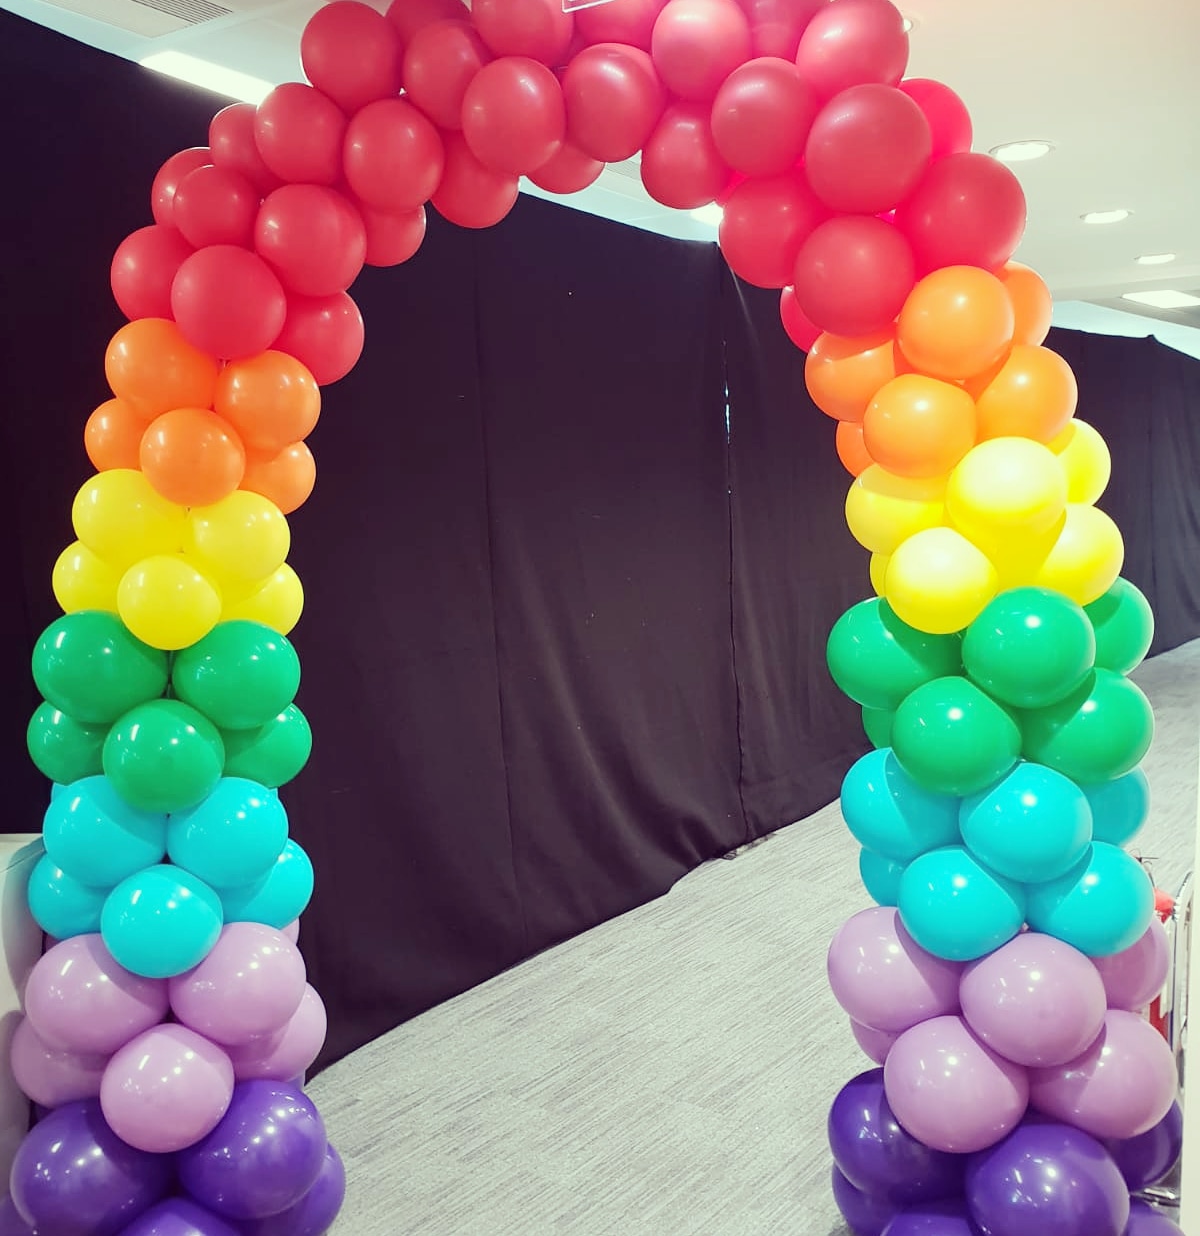 Pride Rainbow Spiral Arch created for Adobe